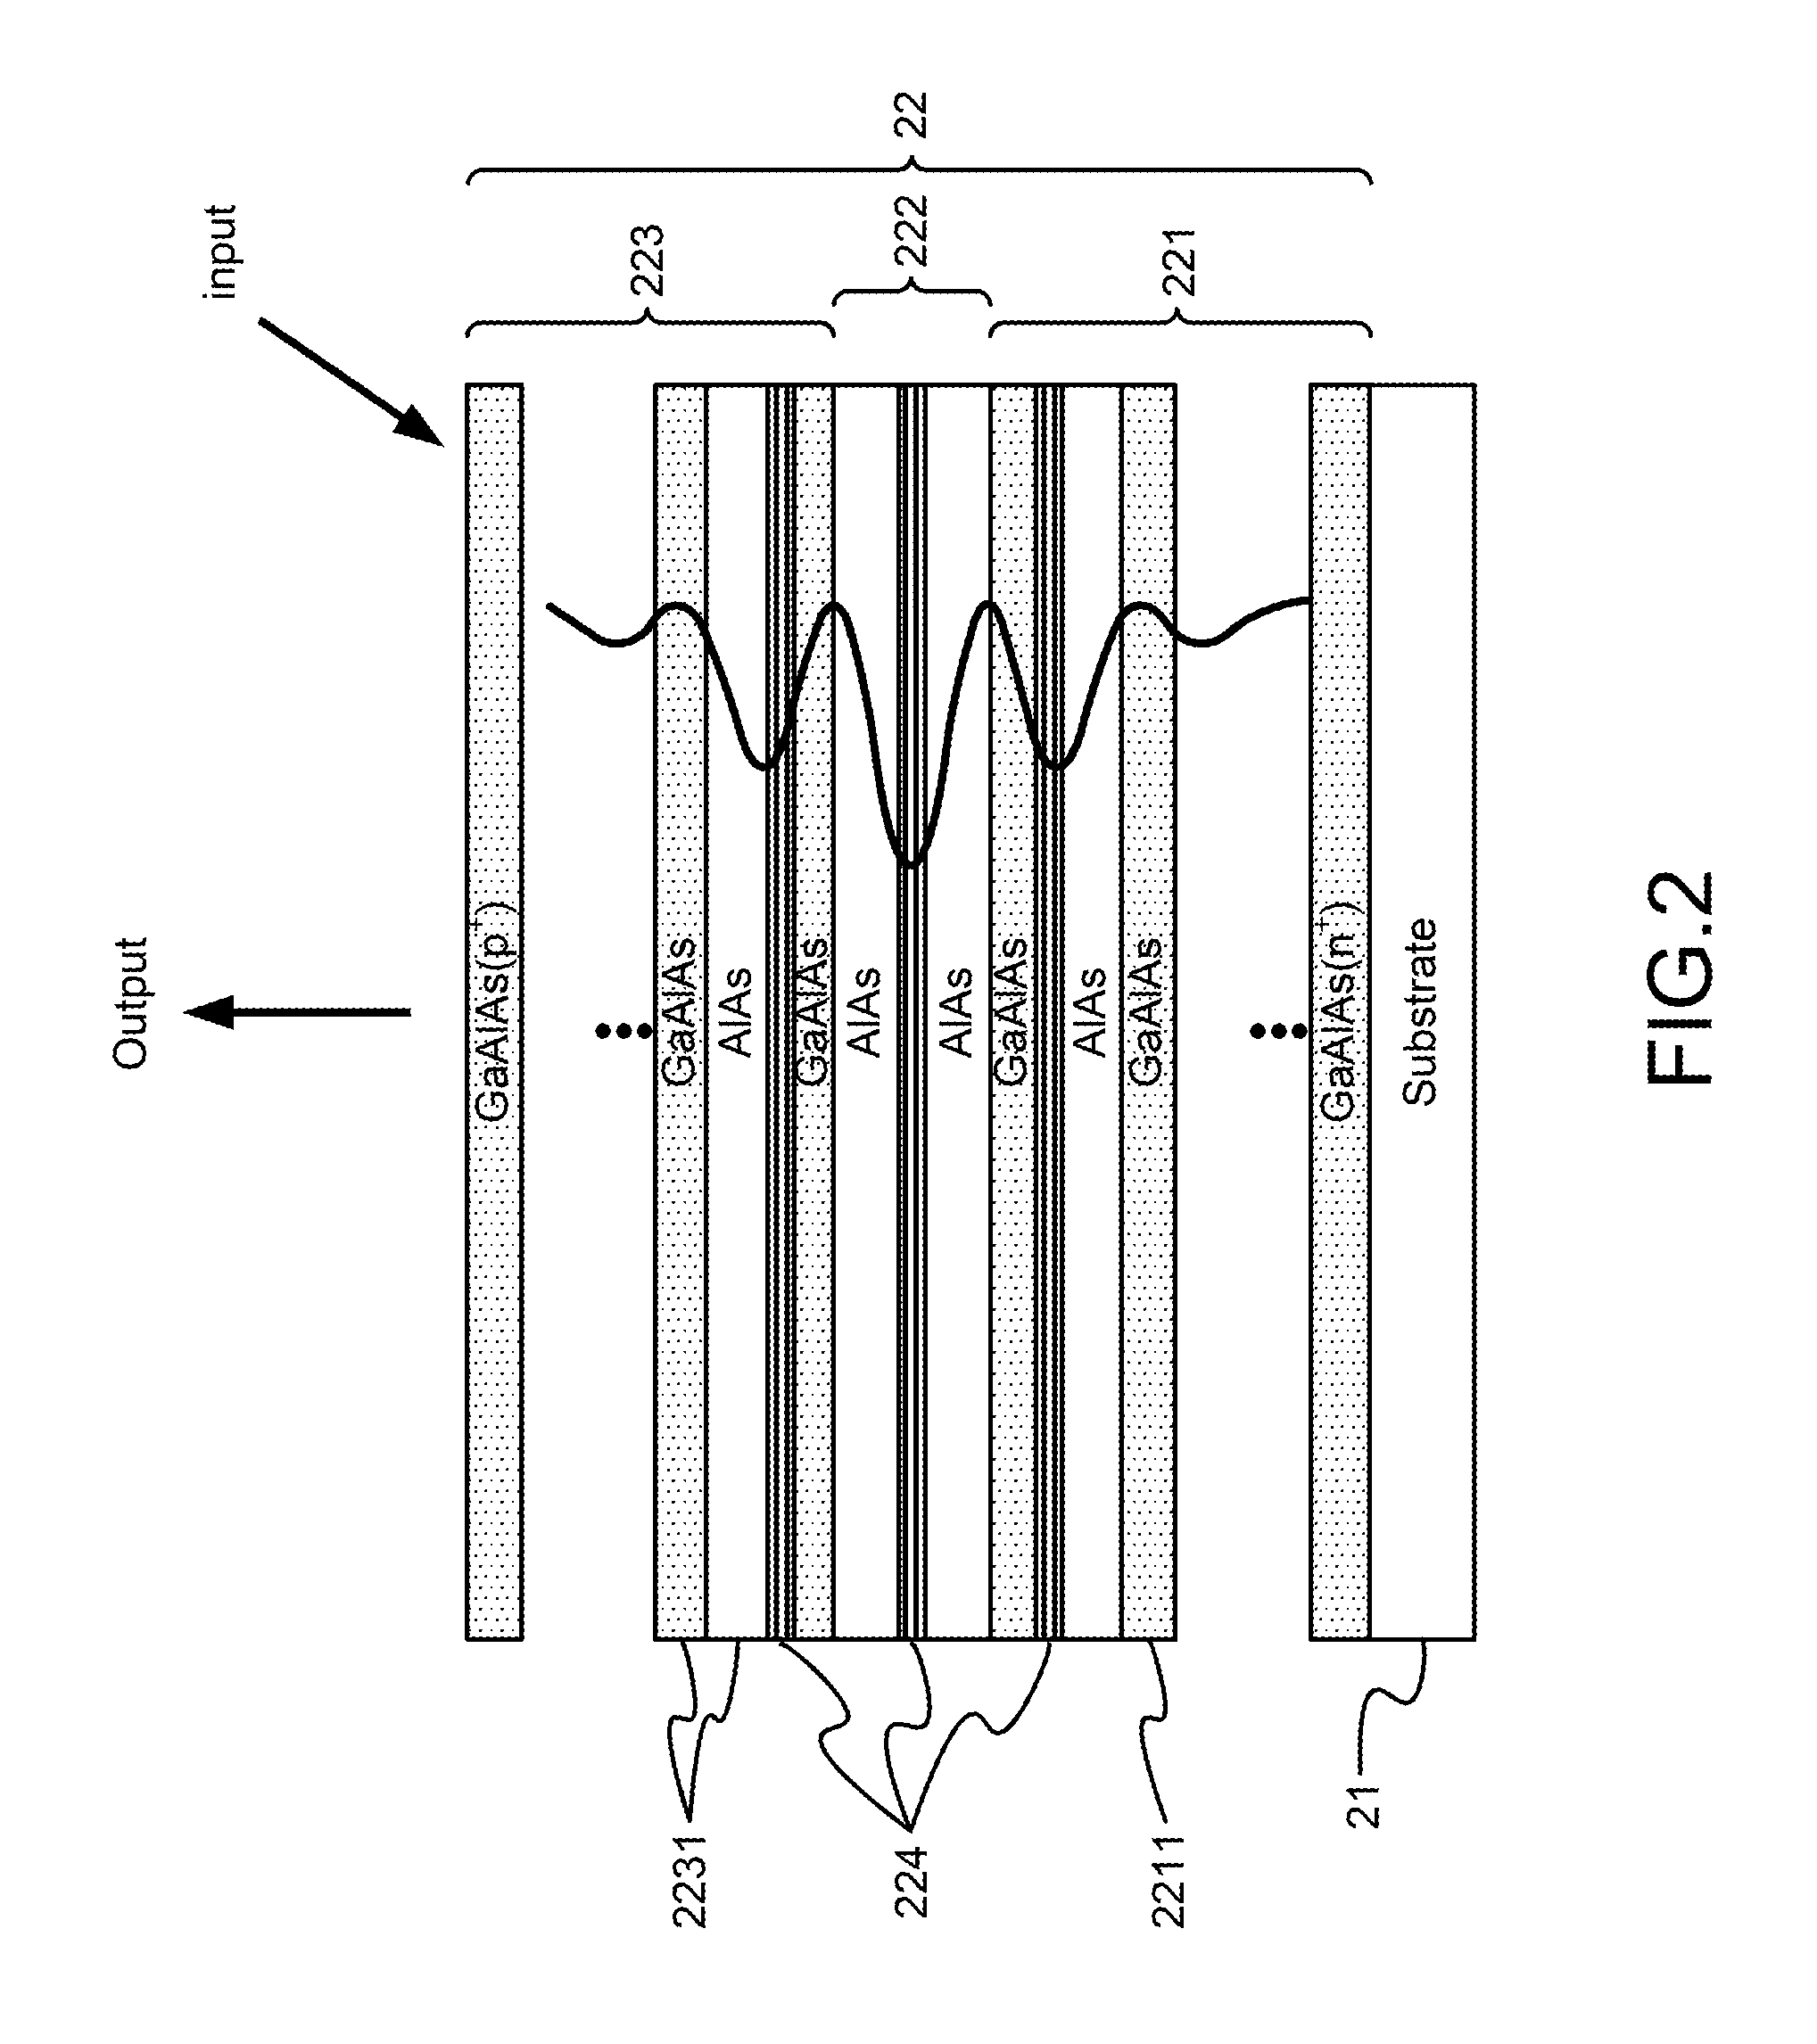 Device of optical passive repeater used in optical multimode communication